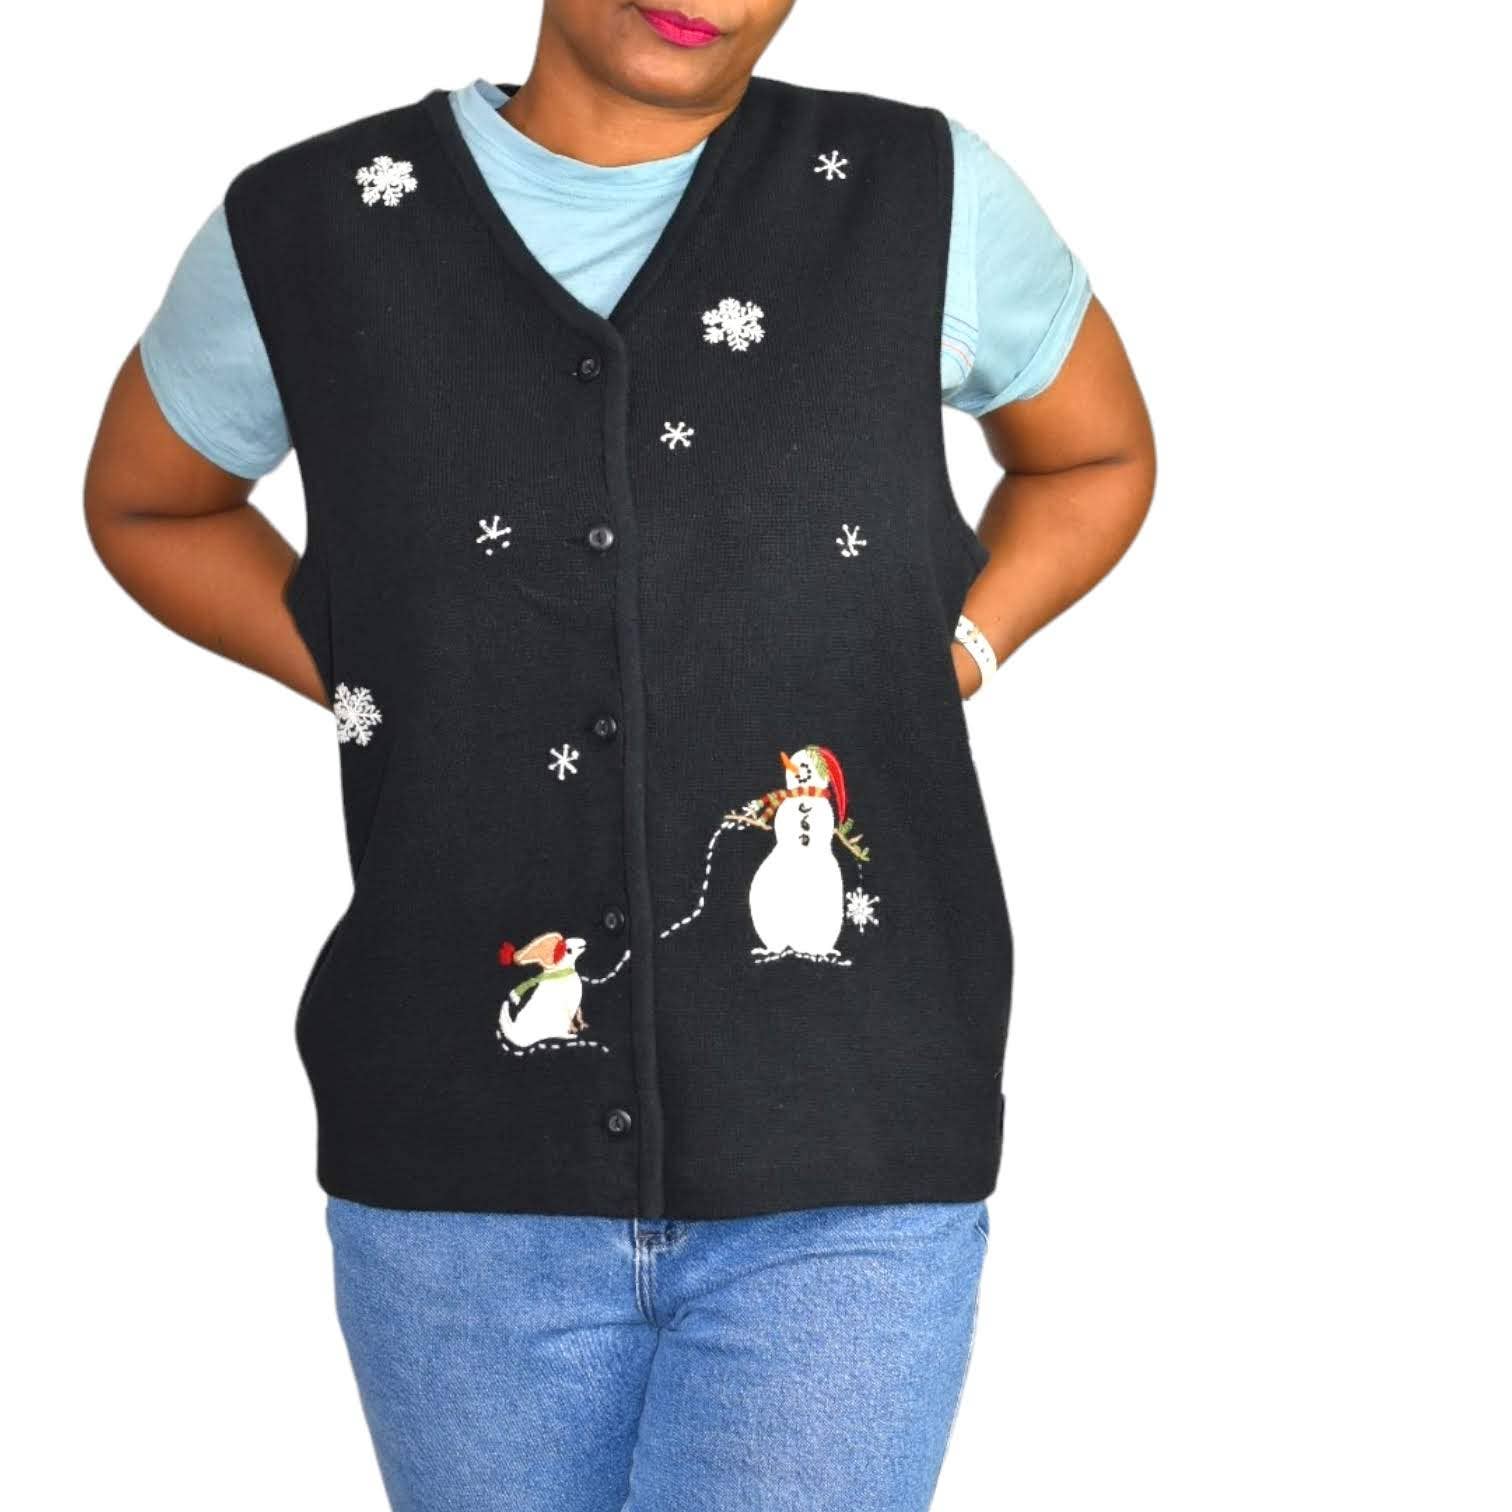 Woolrich Holiday Sweater Vest Ugly Vintage Christmas Festive Dog Snowman Size XL